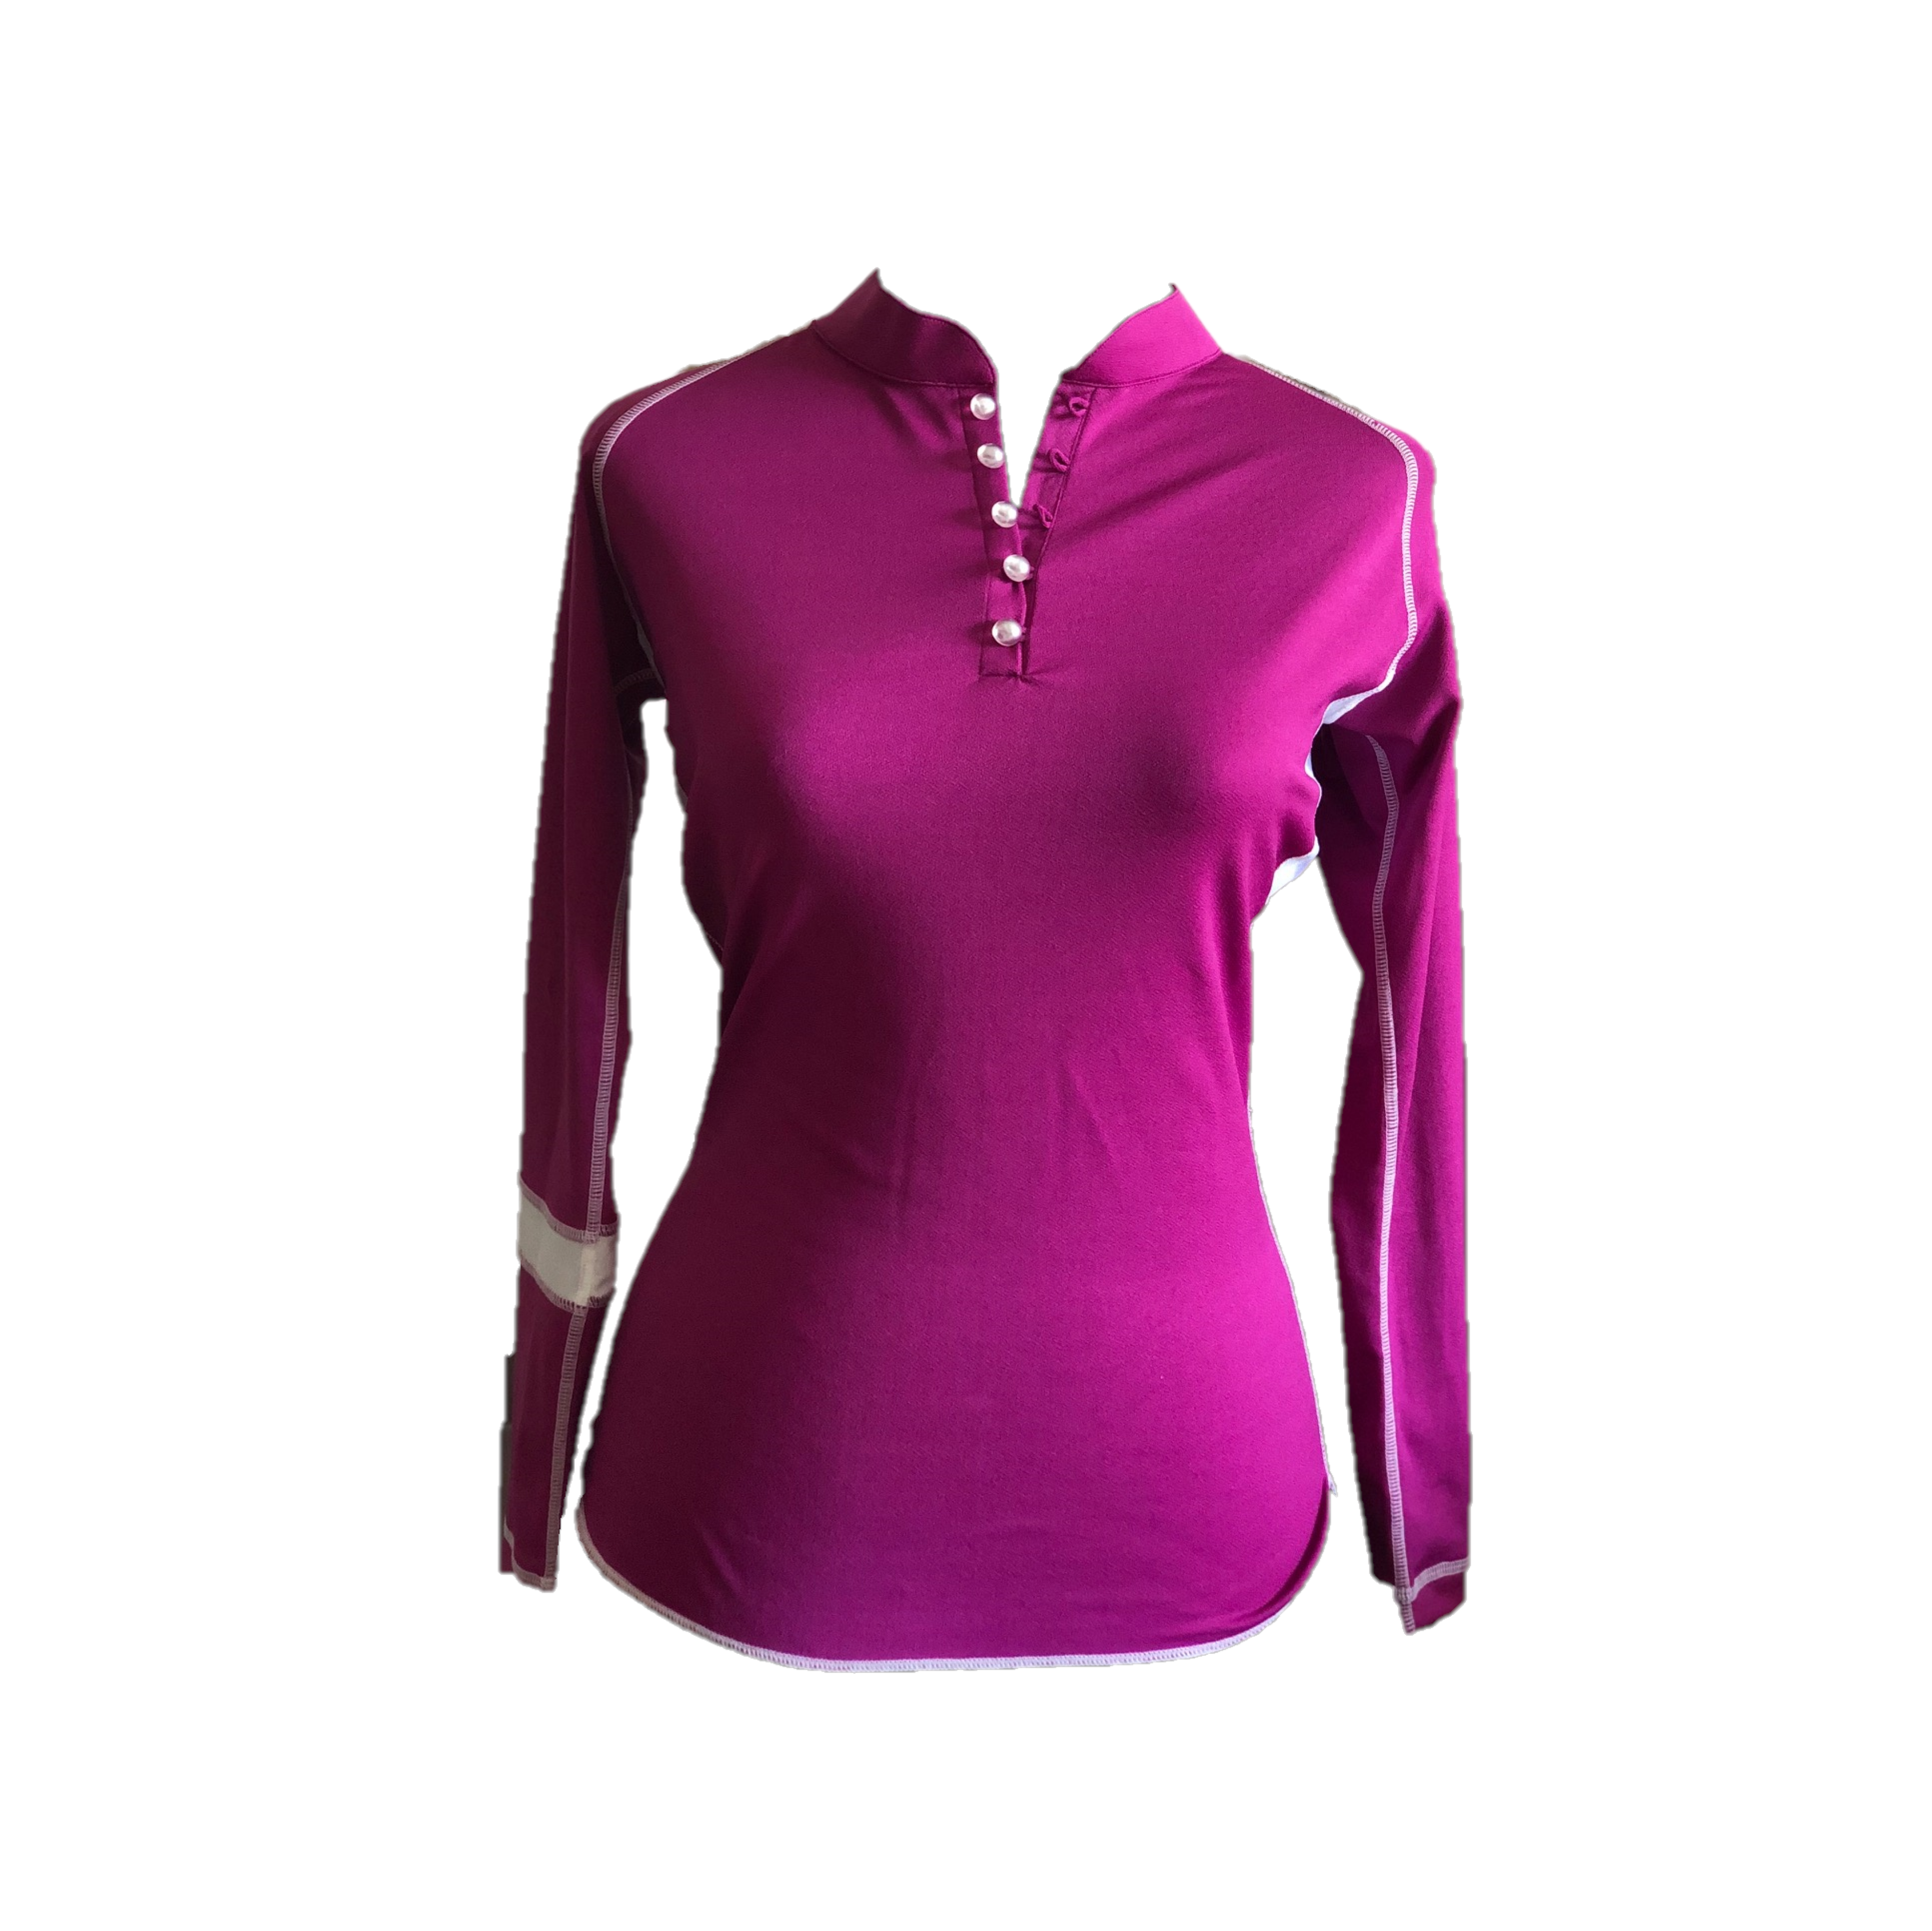 LT-072C || Ladies Top Dark Mauve with White Pearl Button Mandarin Neck and Long Sleeves White Band One Arm Sleeve